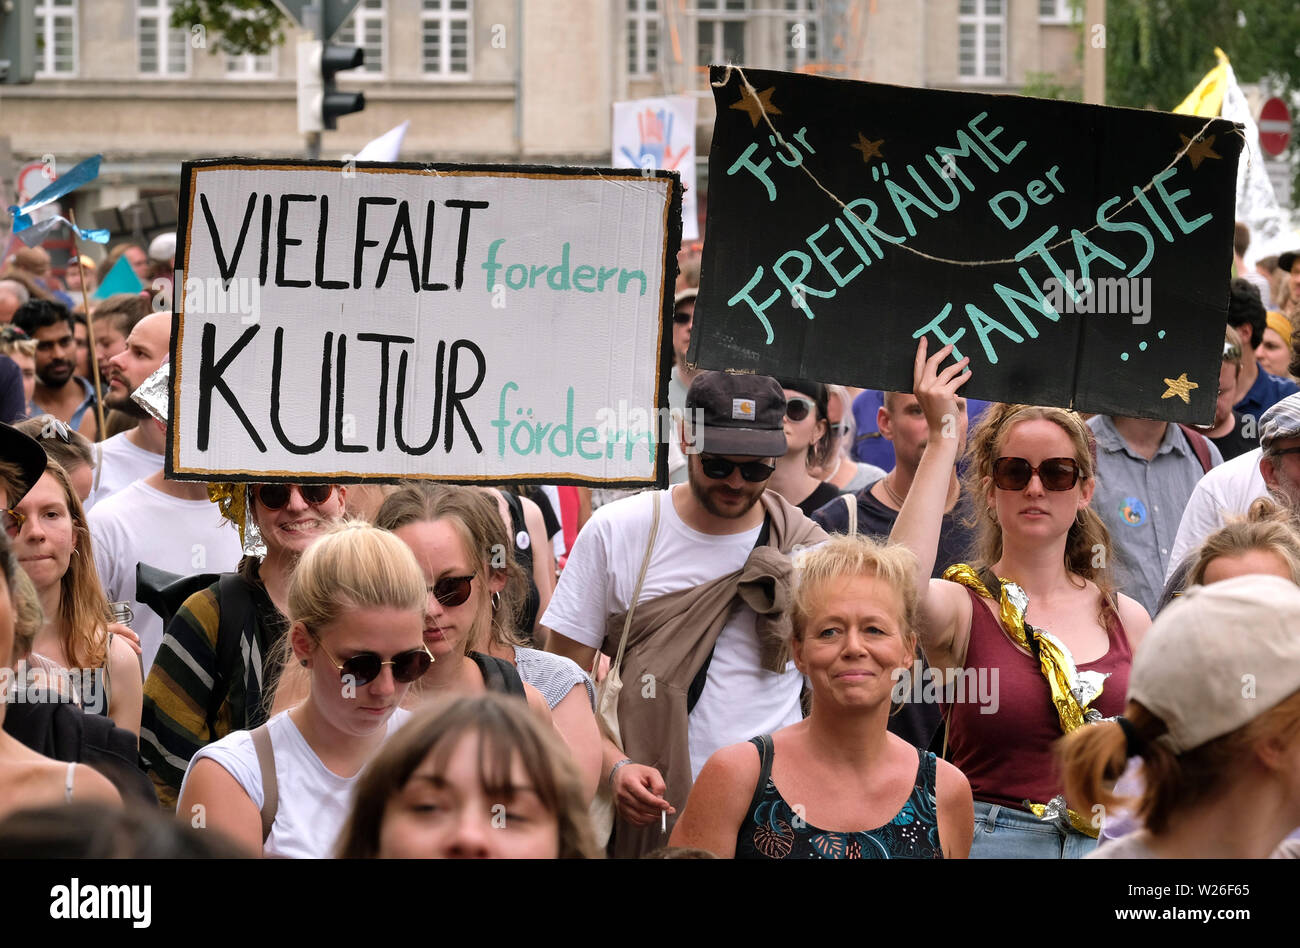 Leipzig, Germany. 06th July, 2019. Participants of a demonstration against racism and exclusion, to which the alliance has #called indivisibly, draw with signs with the inscription 'Vielfalt fordern Kultur fördern' and 'Für Freiräume der Fantasie' through the city. According to the Alliance, Leipzig will be the prelude to further activities this year. Credit: Sebastian Willnow/dpa-Zentralbild/dpa/Alamy Live News Stock Photo